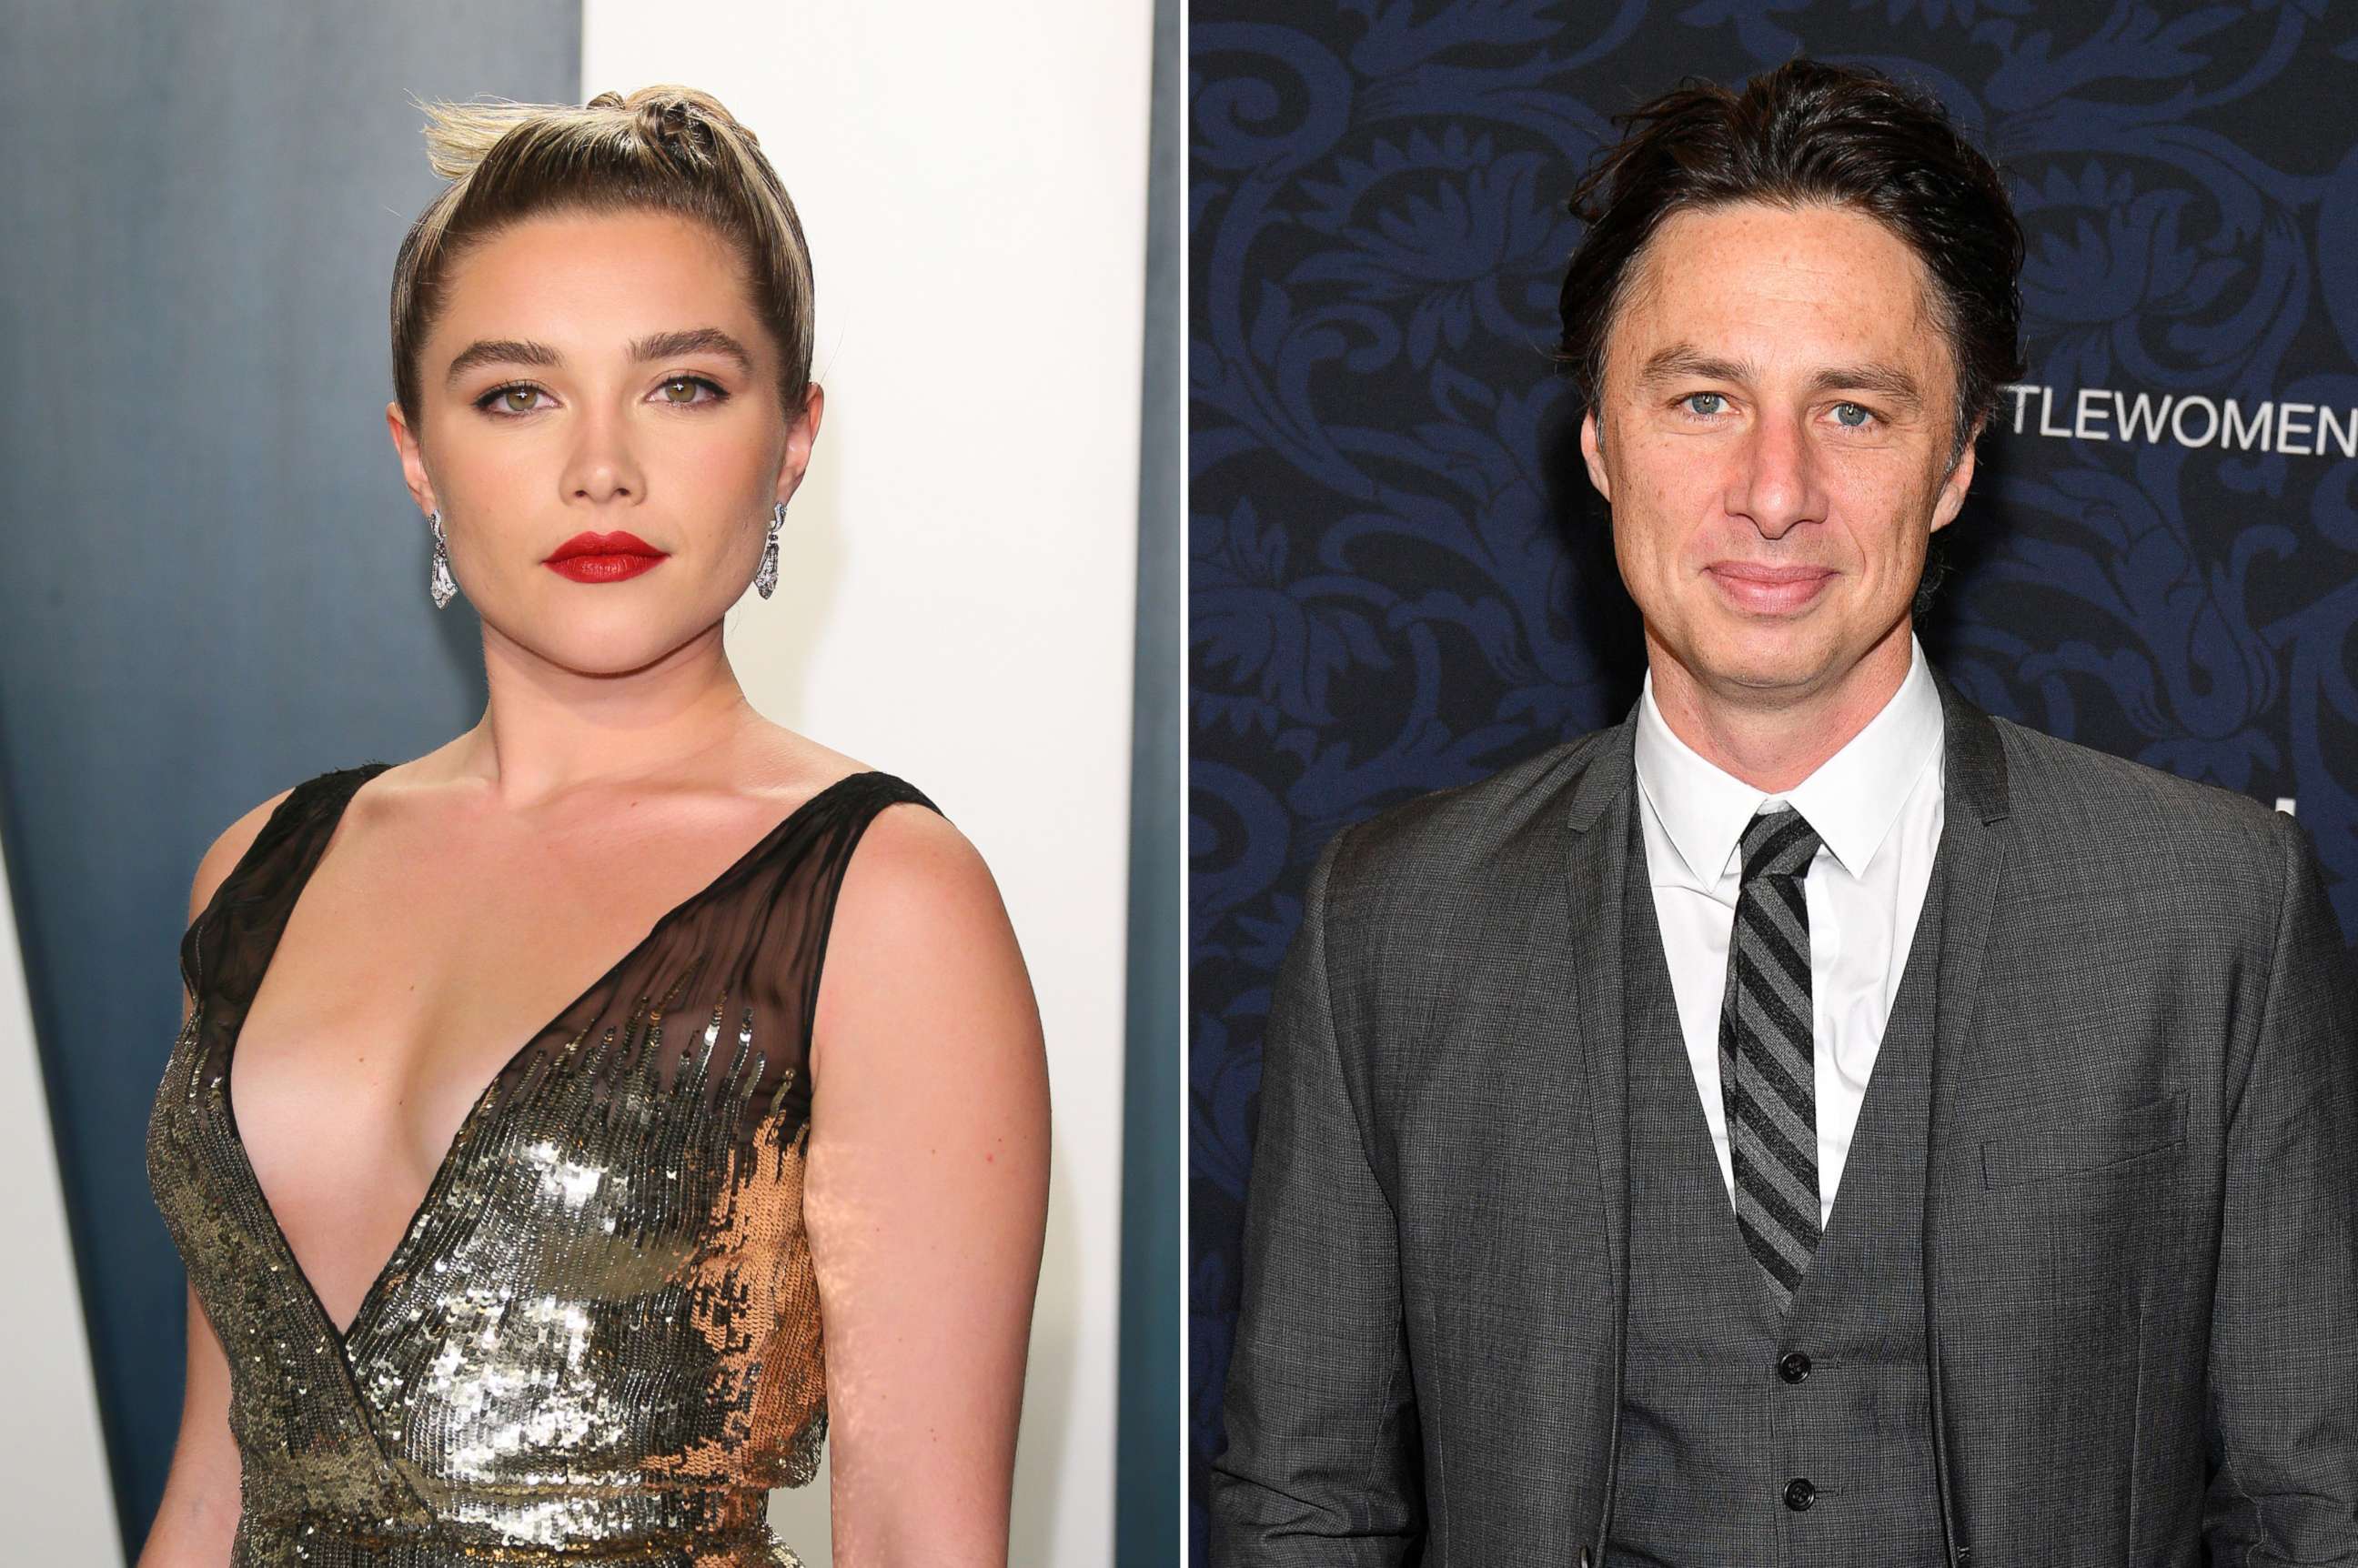 PHOTO: Left: Florence Pugh at the 2020 Vanity Fair Oscar Party in Beverly Hills, Feb. 9, 2020. Right: Zach Braff attends the "Little Women" in New York City, Dec. 07, 2019.